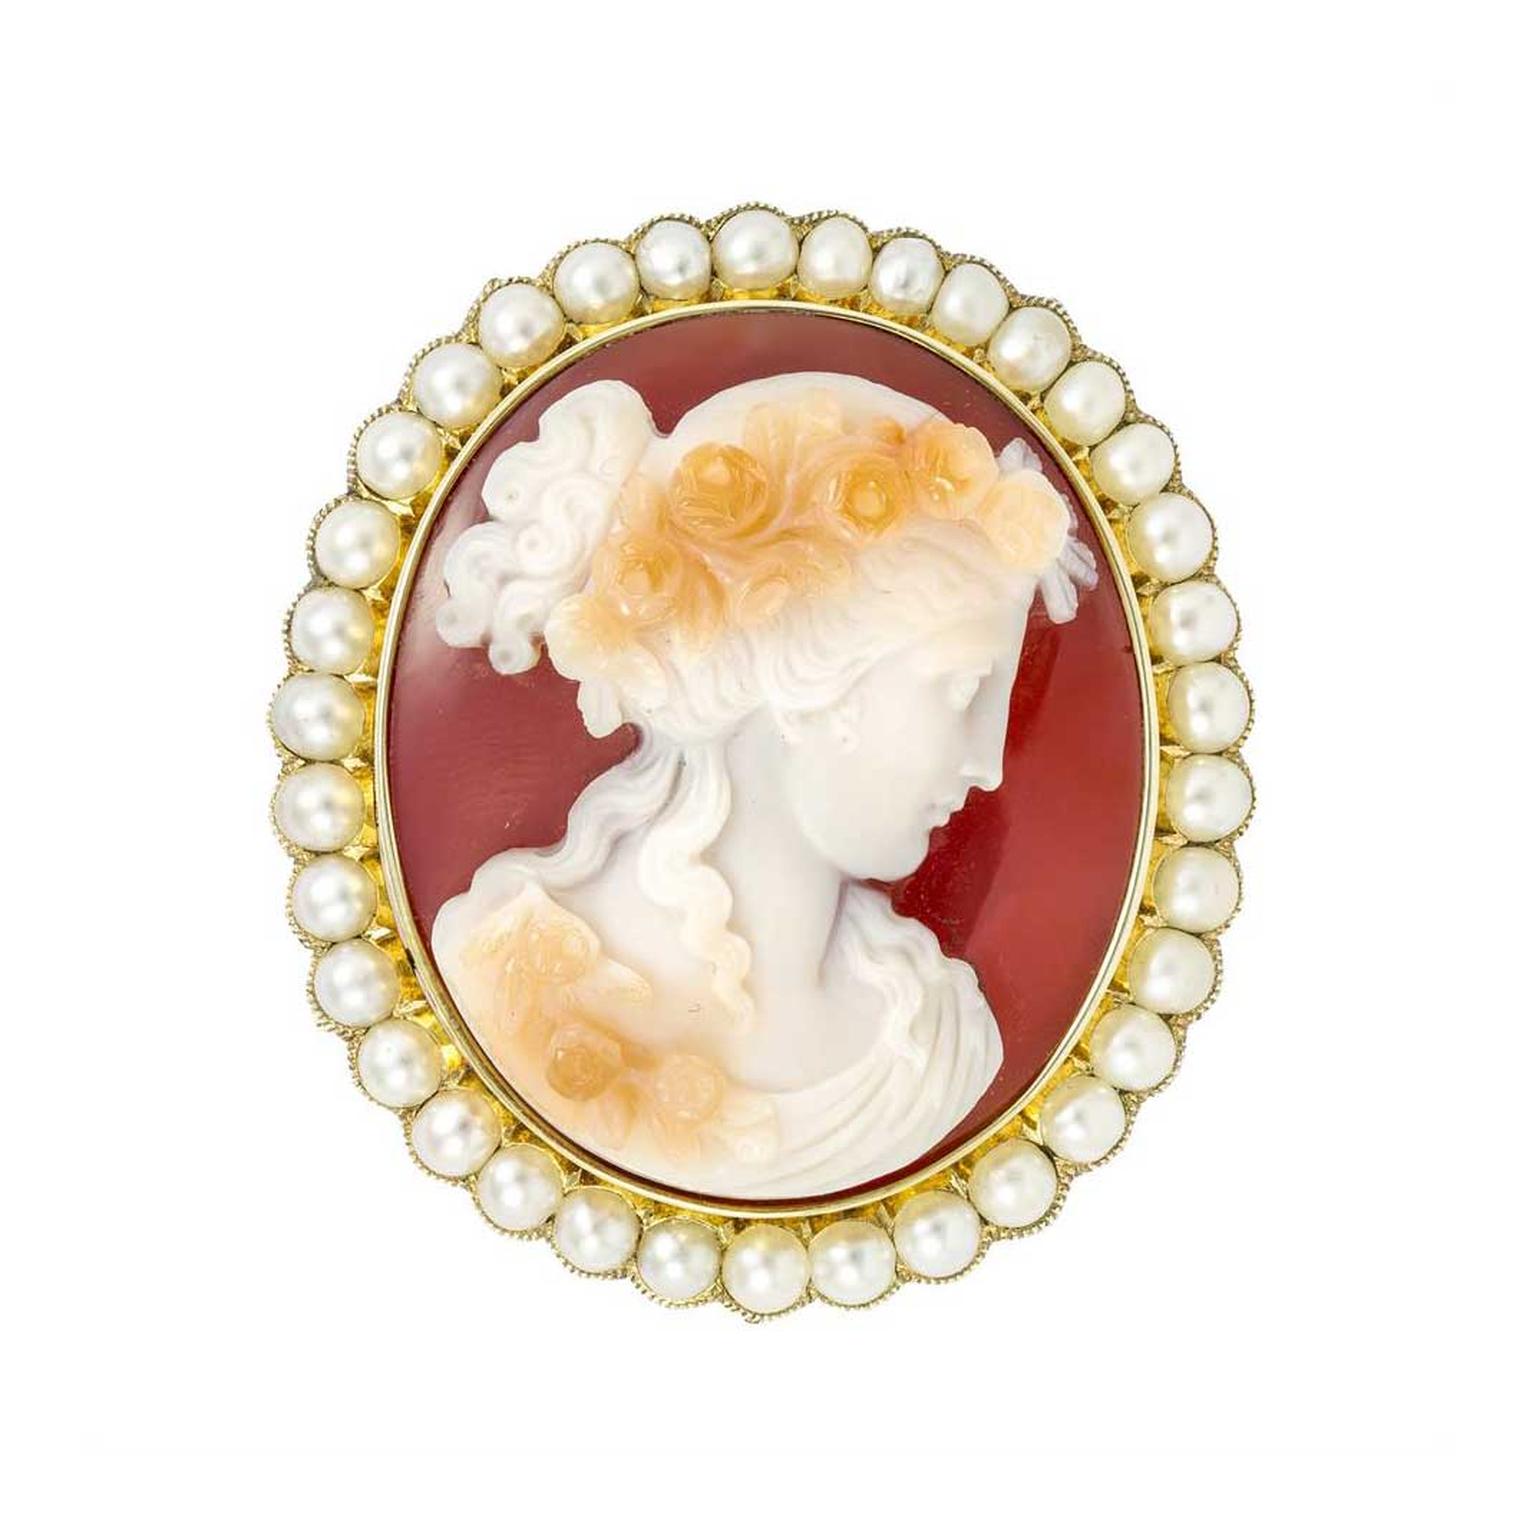 Cameo Brooch Vintage Lady Pin Brooch Bouquet Victorian Costume Cameo Jewelry